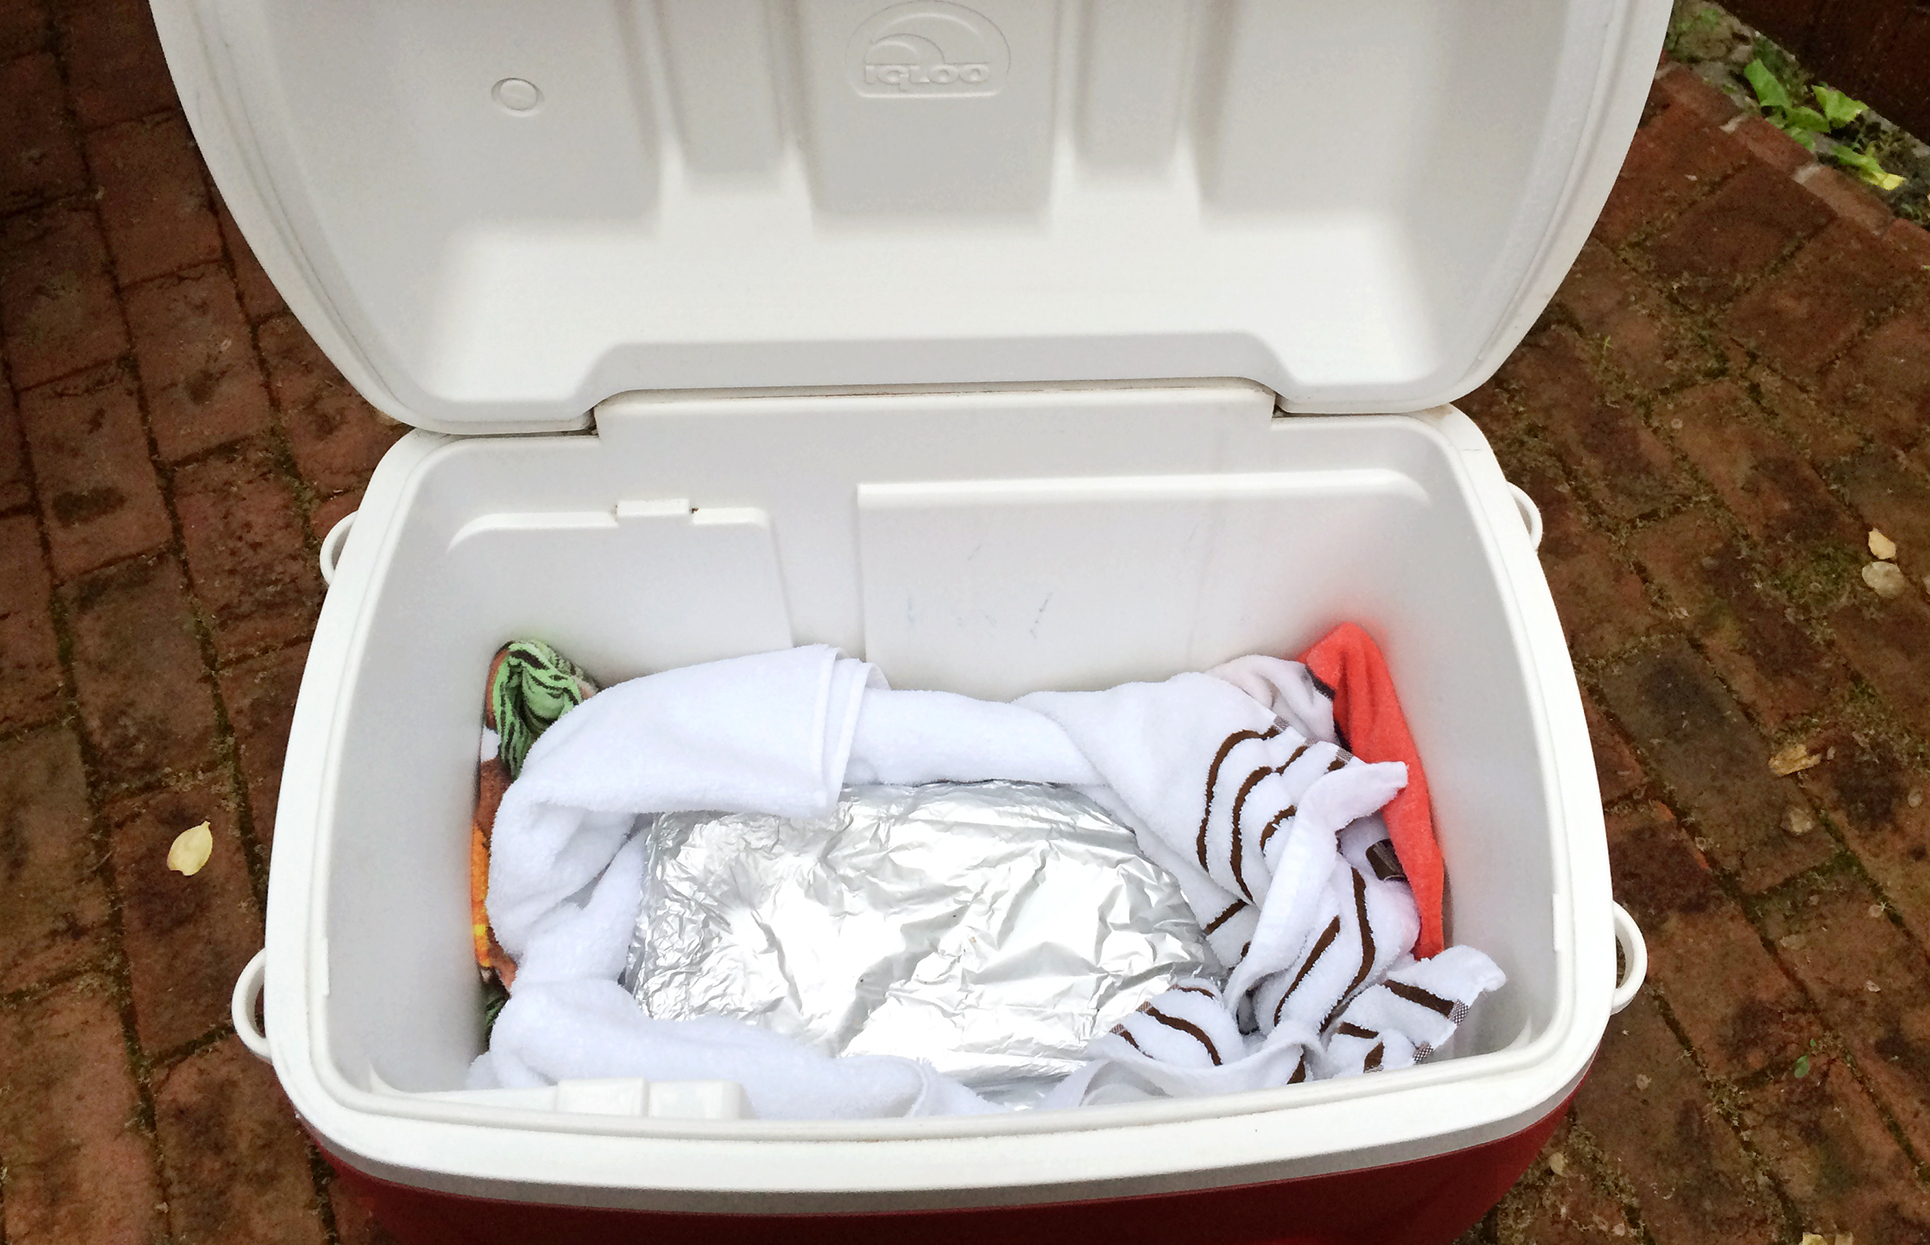 This cooler may be the most important part of perfecting your barbecue.